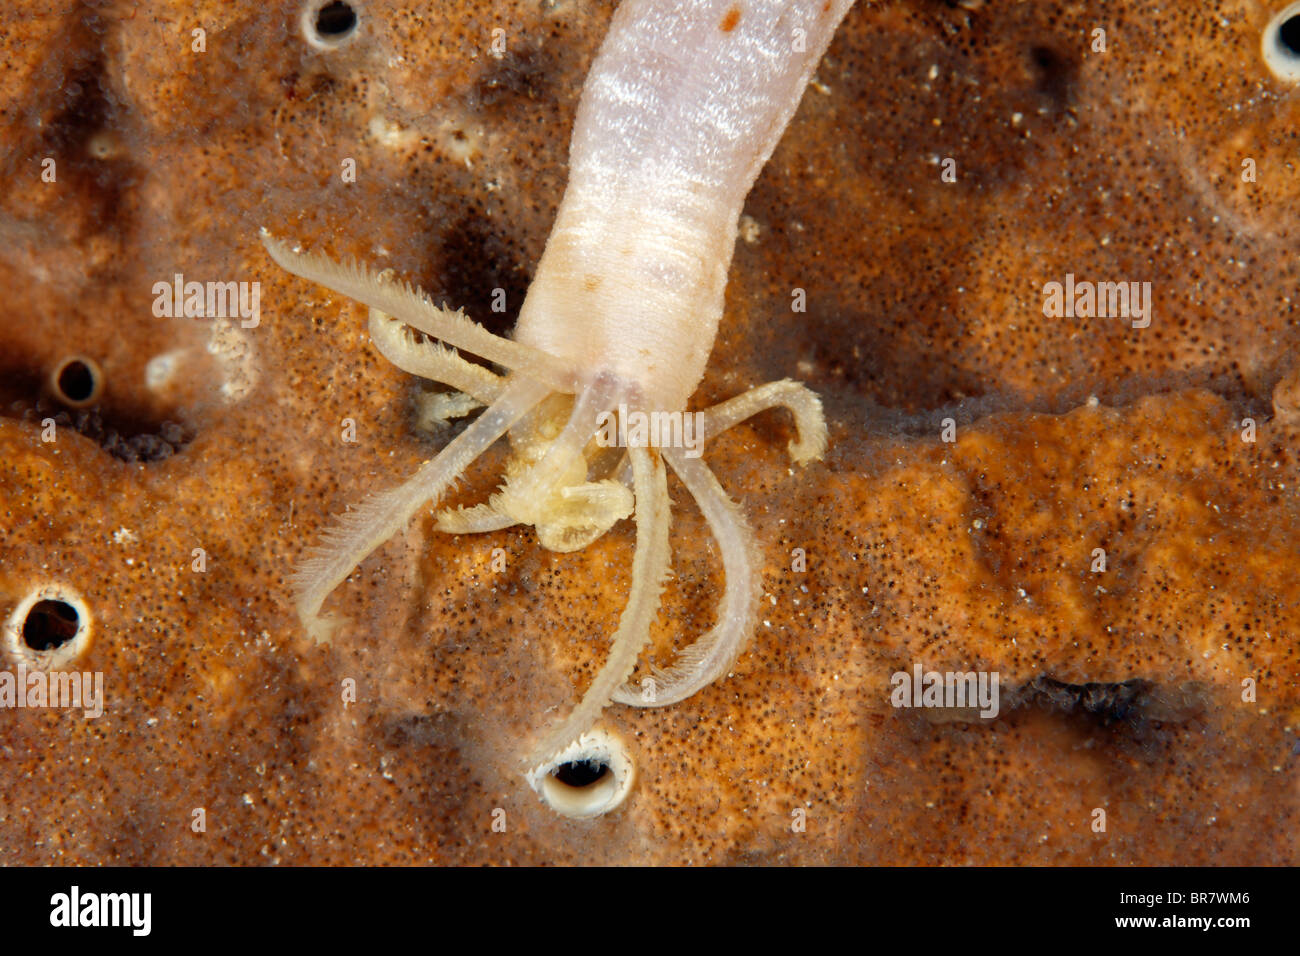 Sea cucumber, either Euapta sp, or Synapta sp.  Showing the feeding tentacles Stock Photo